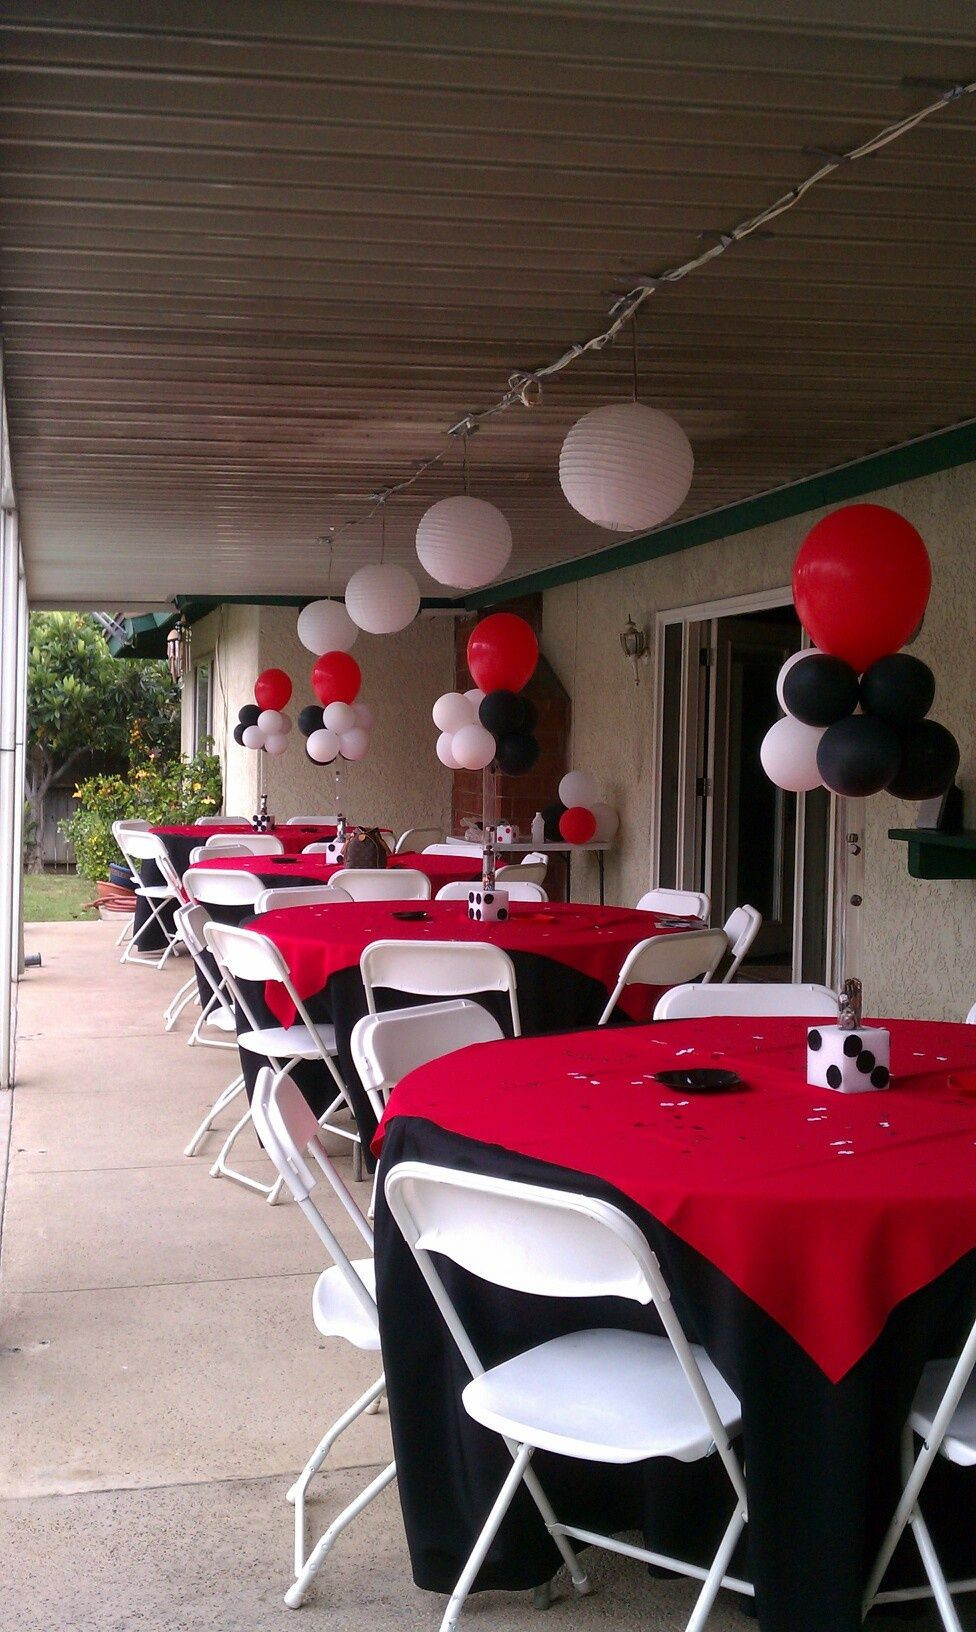 Red And White Graduation Party Ideas
 Maybe black and white checkered undercloth with solid